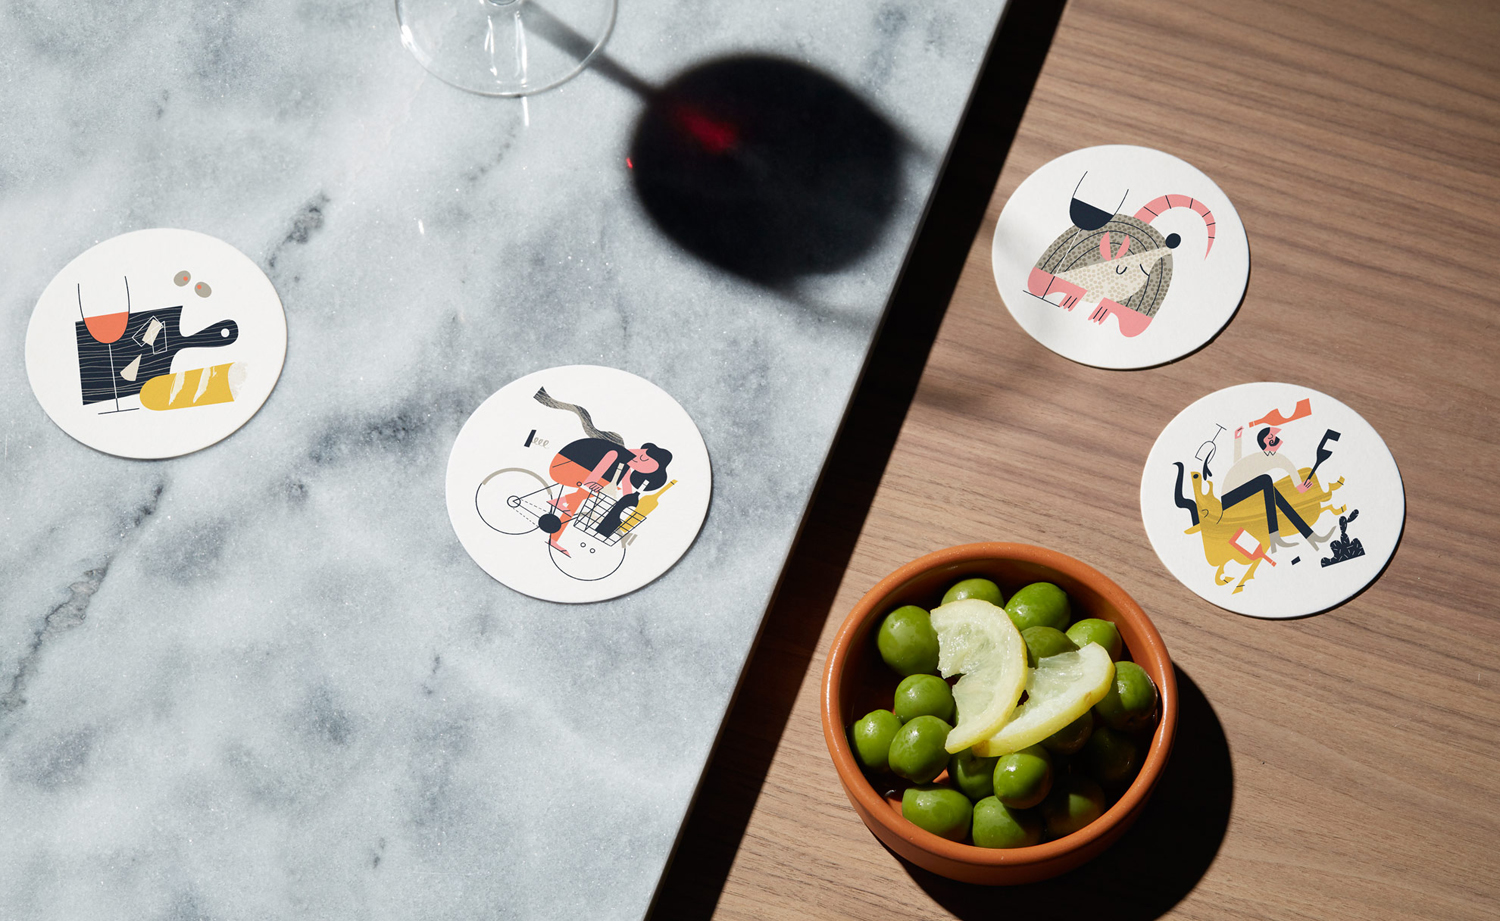 Branded Coaster Design Ideas – High Street Wine Co. by Conductor, United Kingdom